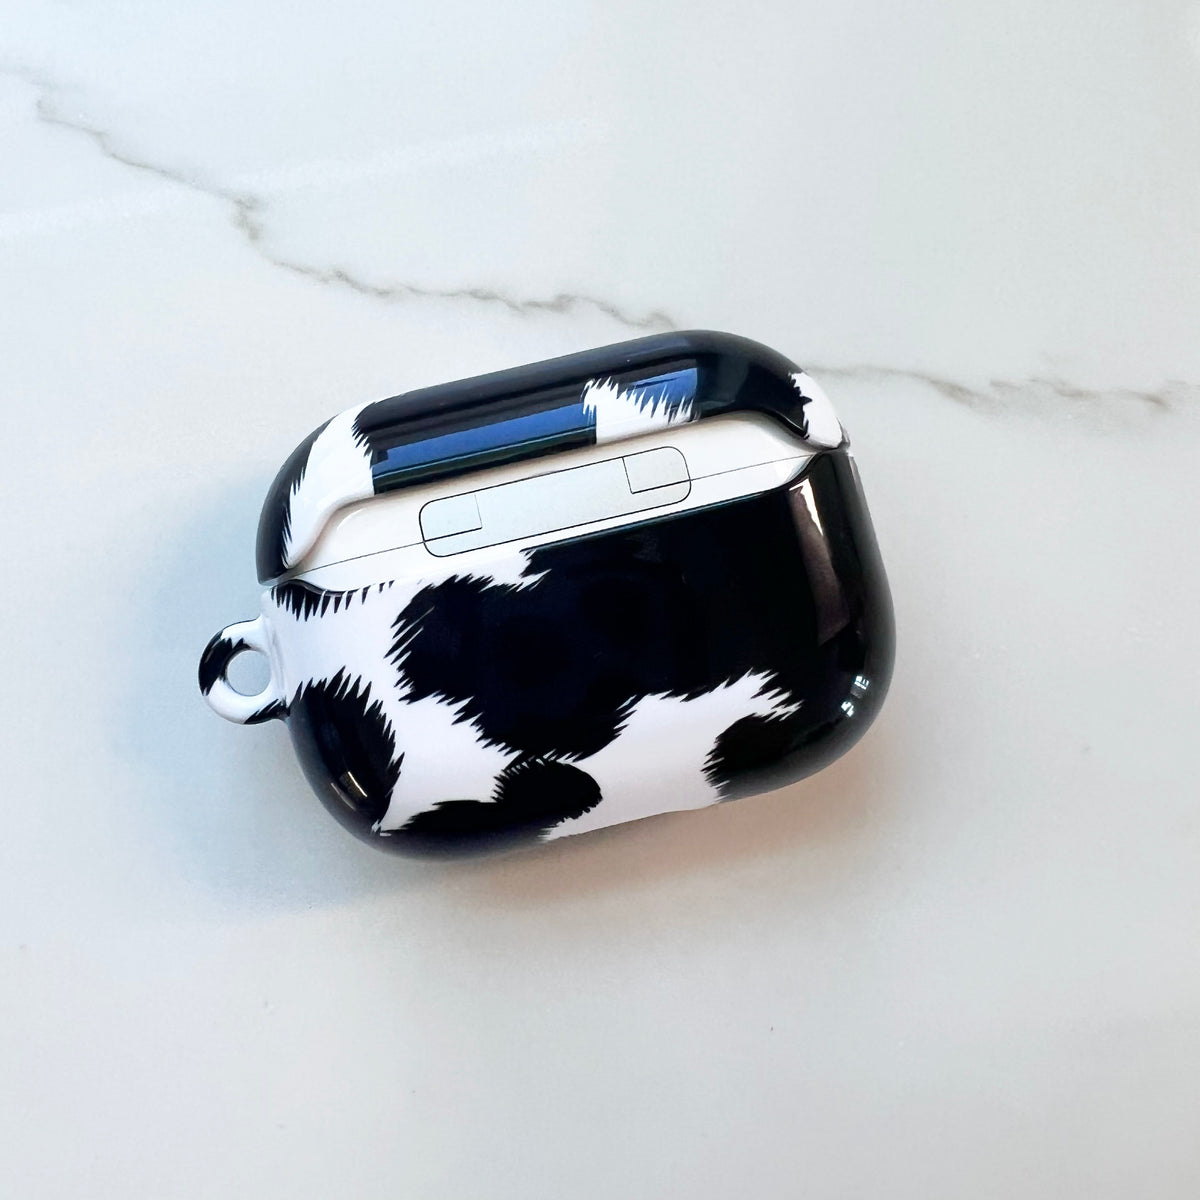 Cow Skin AirPods Case - AirPods Pro